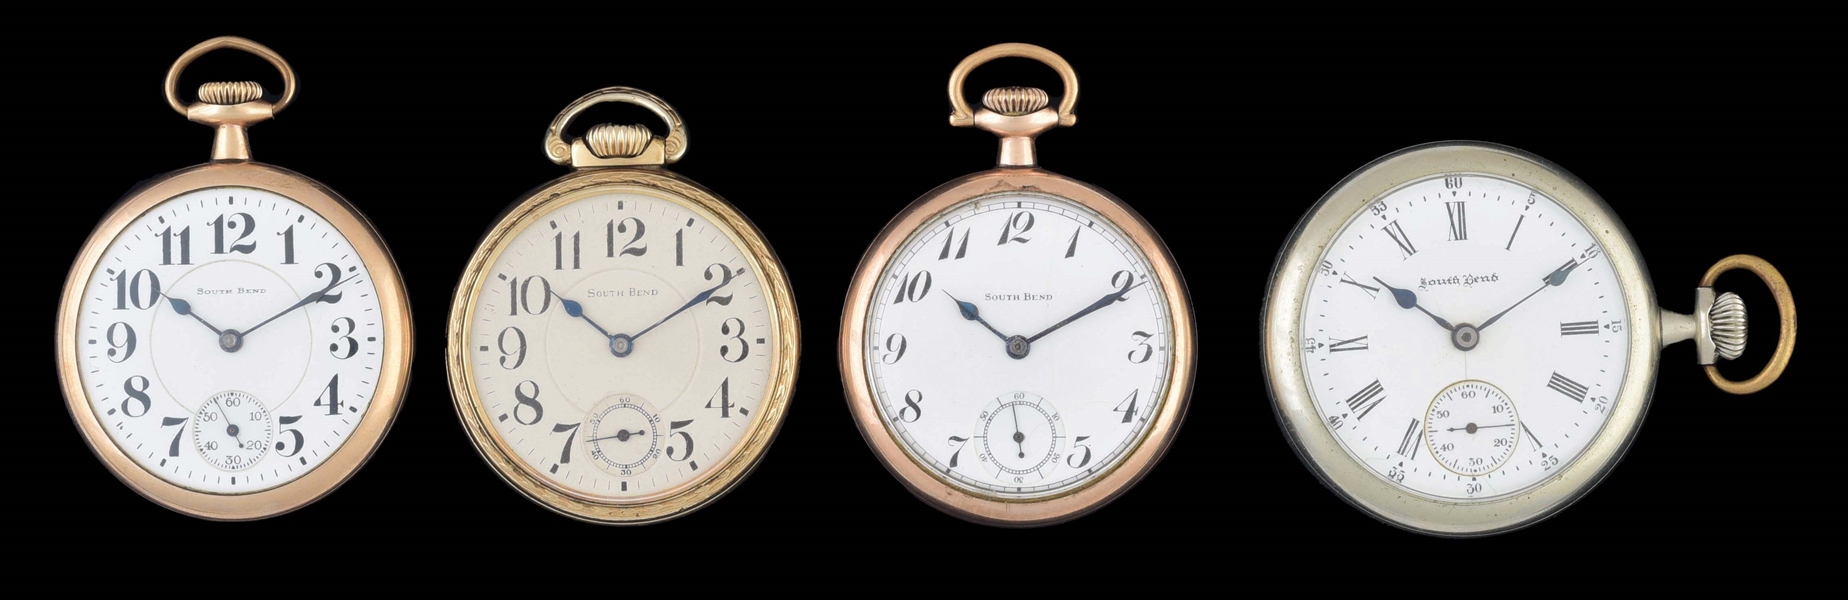 LOT OF 4: SOUTH BEND OPEN FACE POCKET WATCHES.